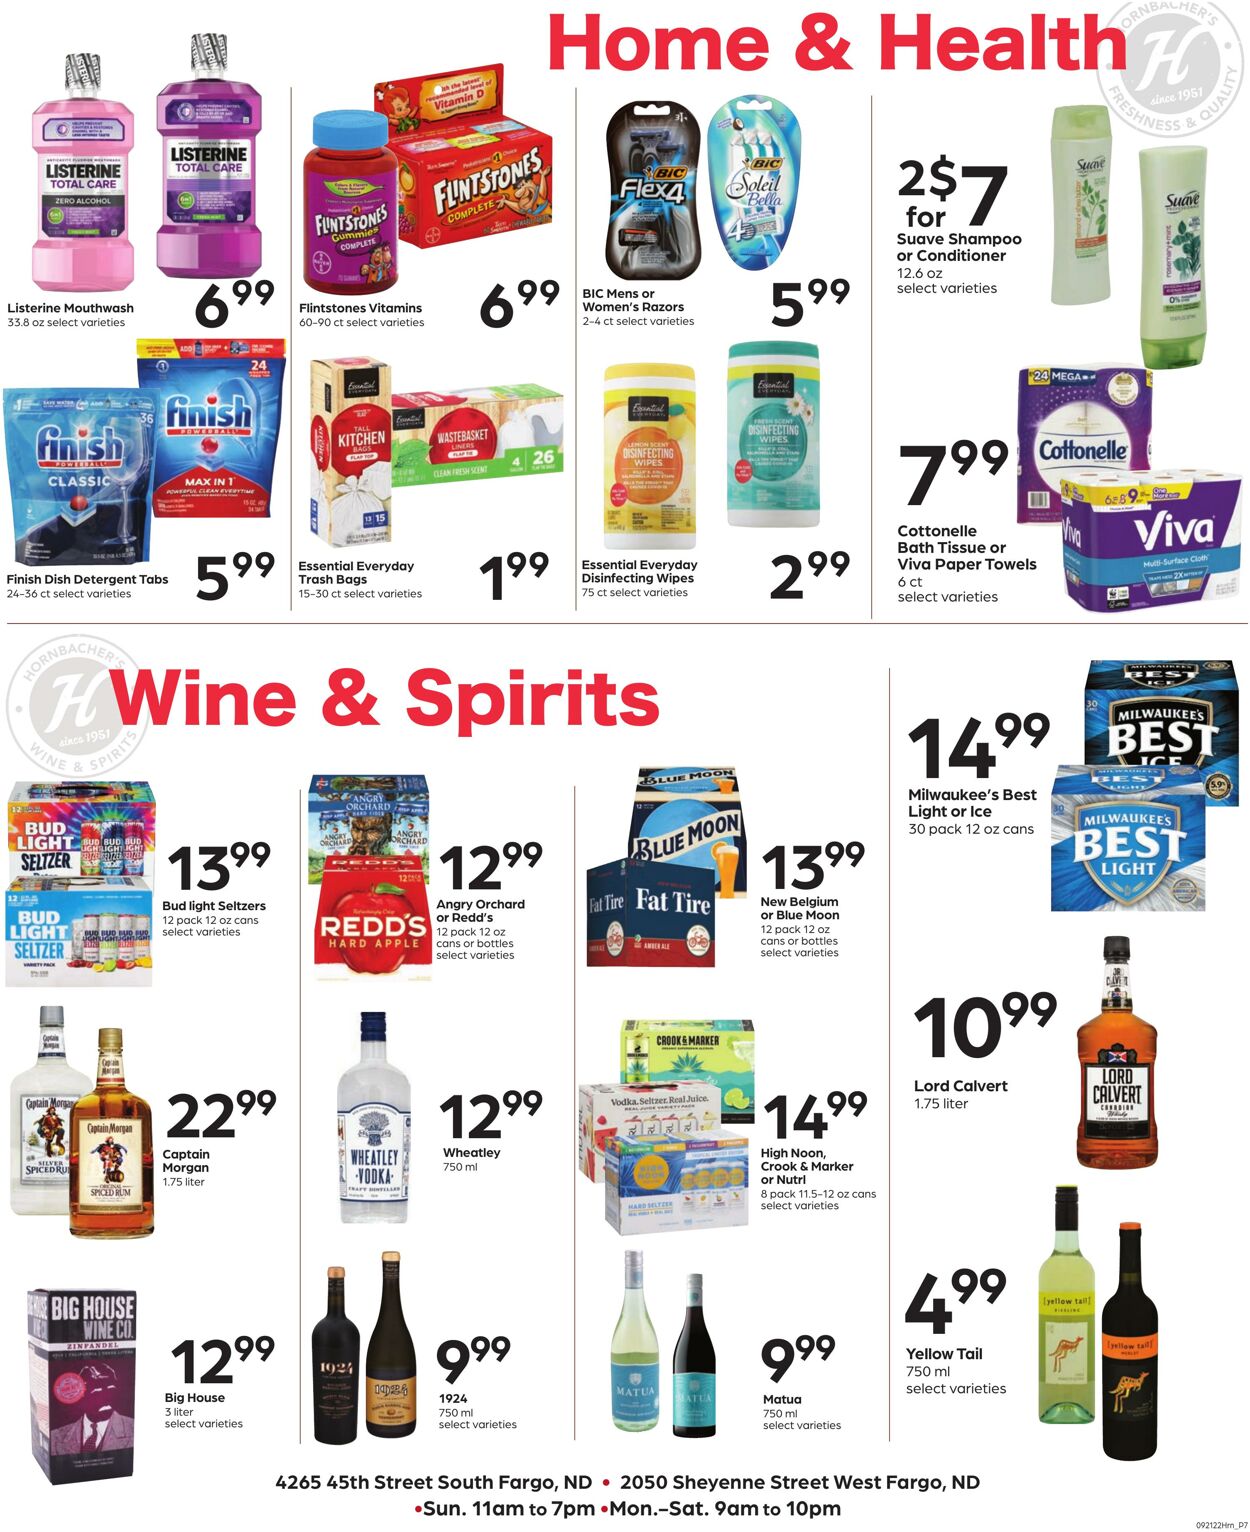 Weekly ad Hornbacher's 09/21/2022 - 09/27/2022